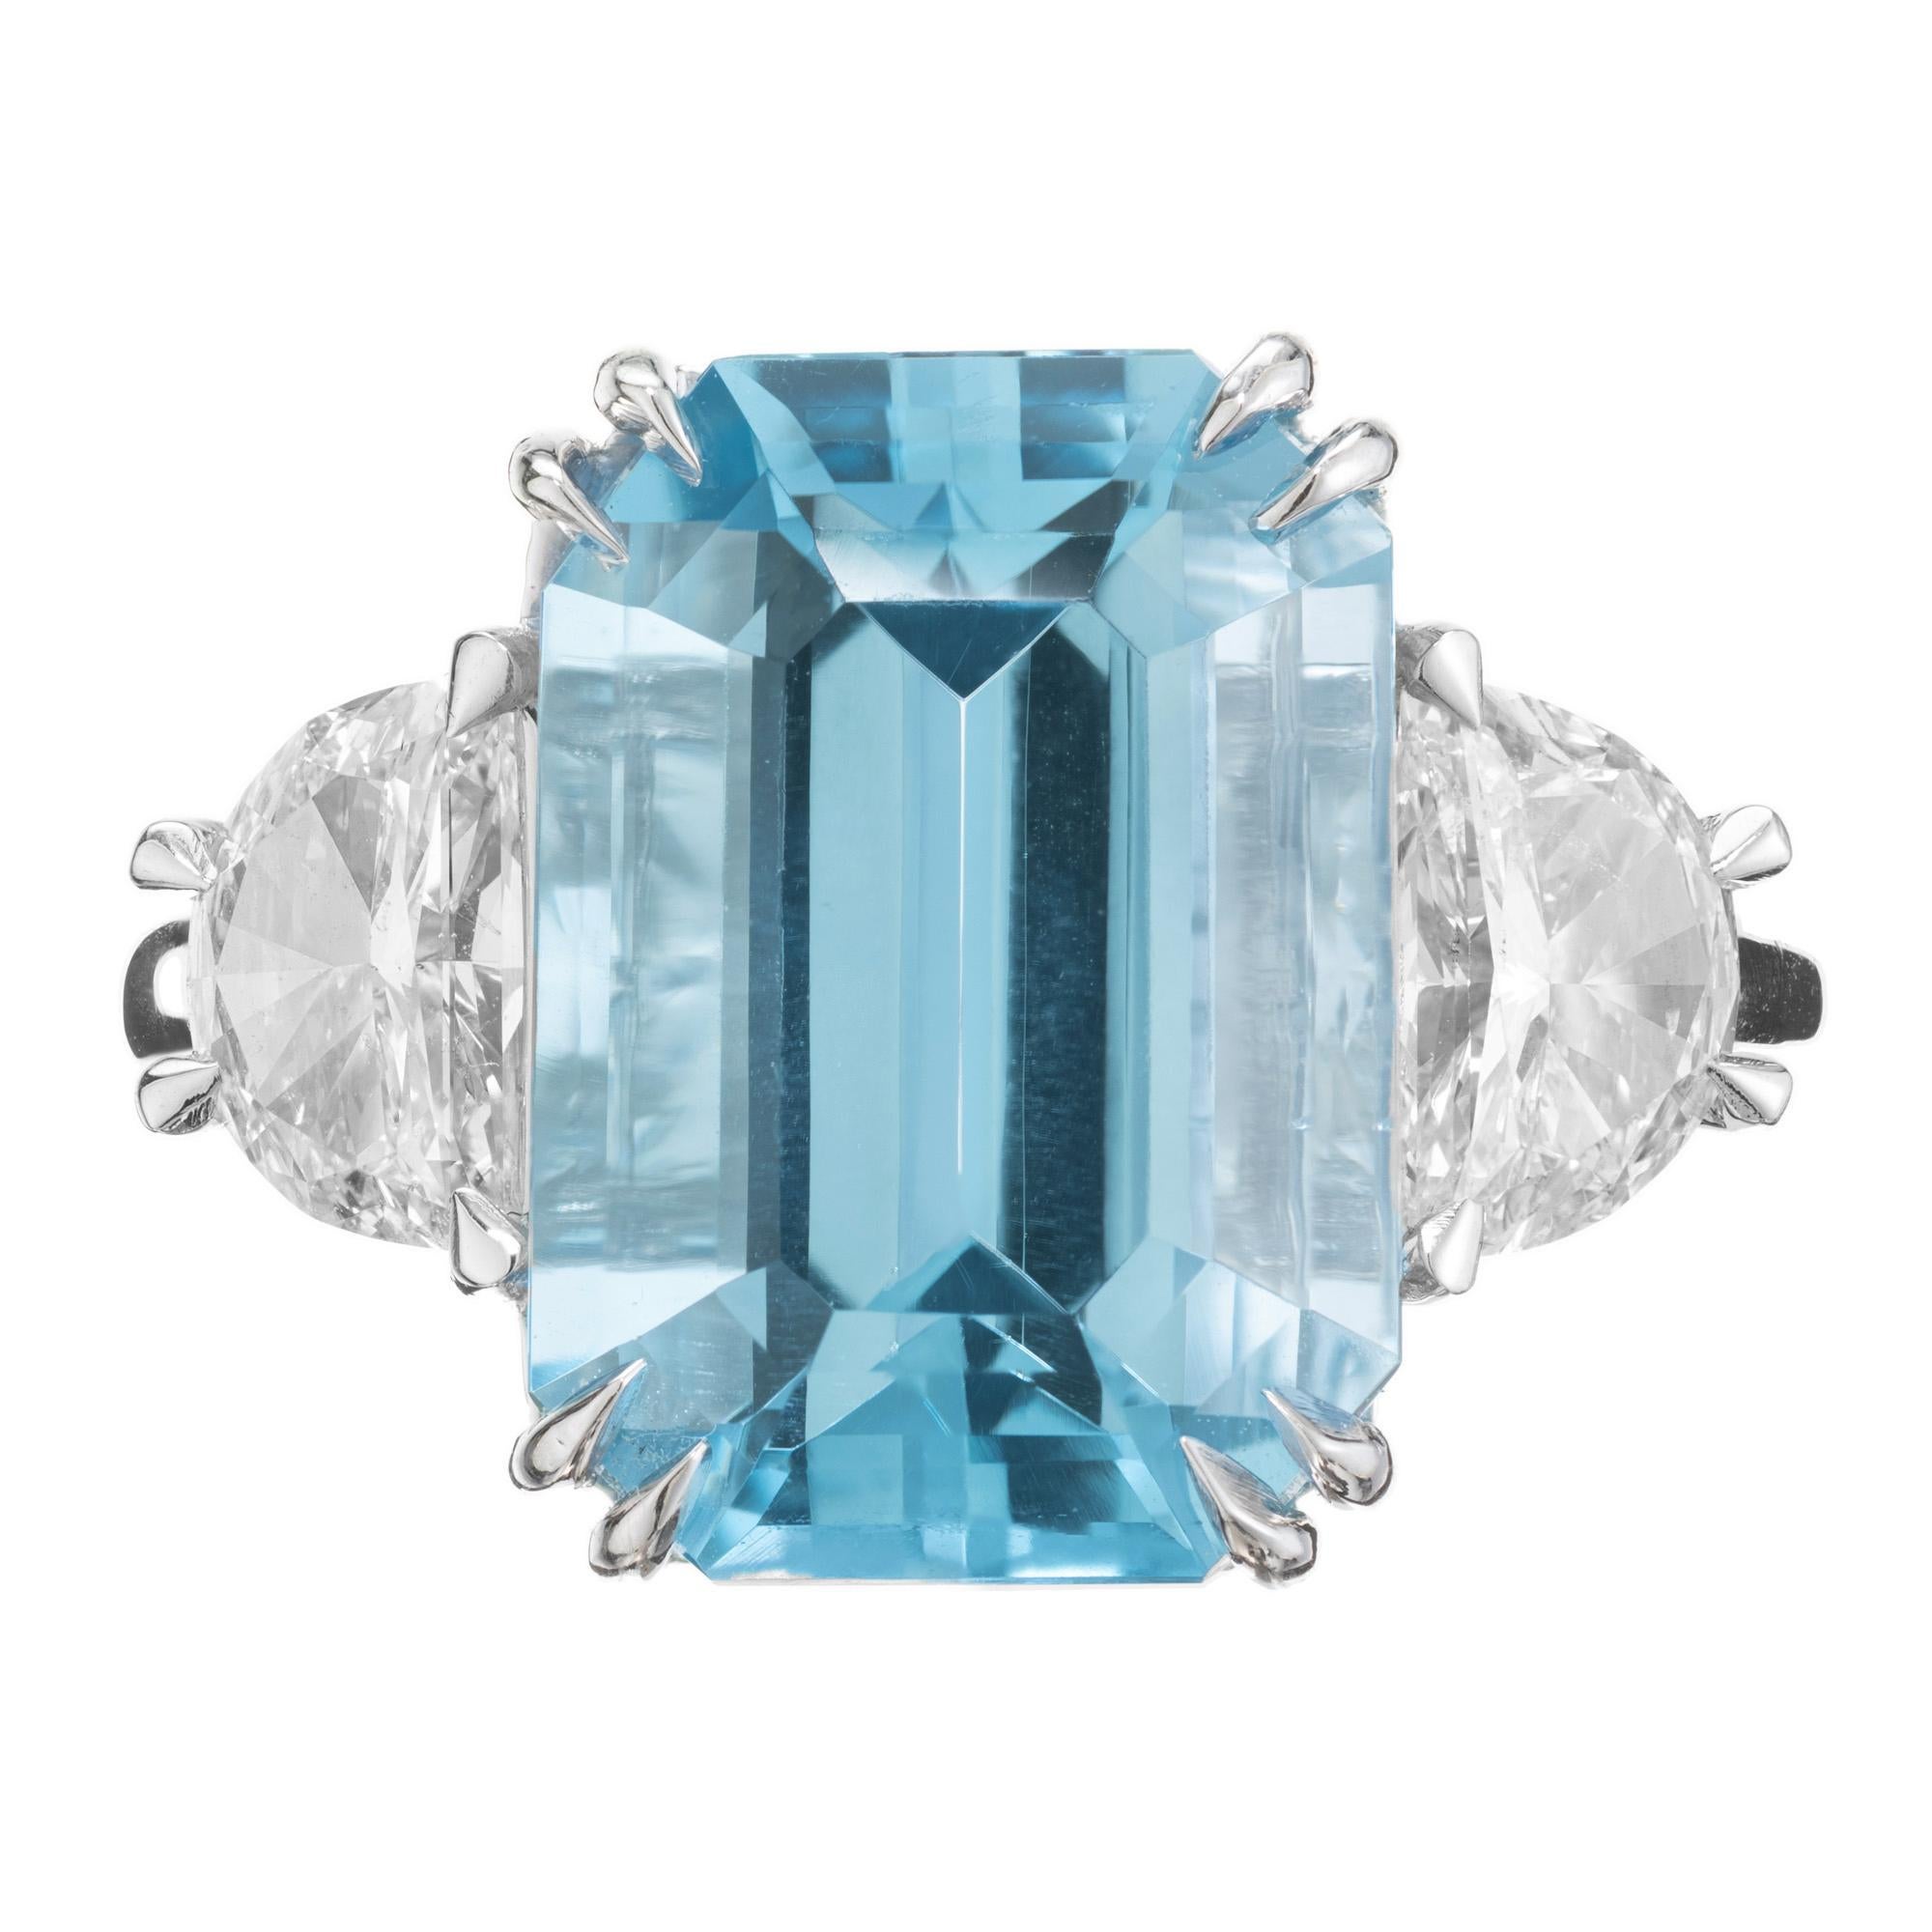 Aqua and diamond three-stone engagement ring. 7.44ct octagonal shape aquamarine mounted securely in a platinum 8 pong setting and accented with 2 half moon side diamonds totaling 1.17cts. One of the finest crisp greenish blue aquas we have come